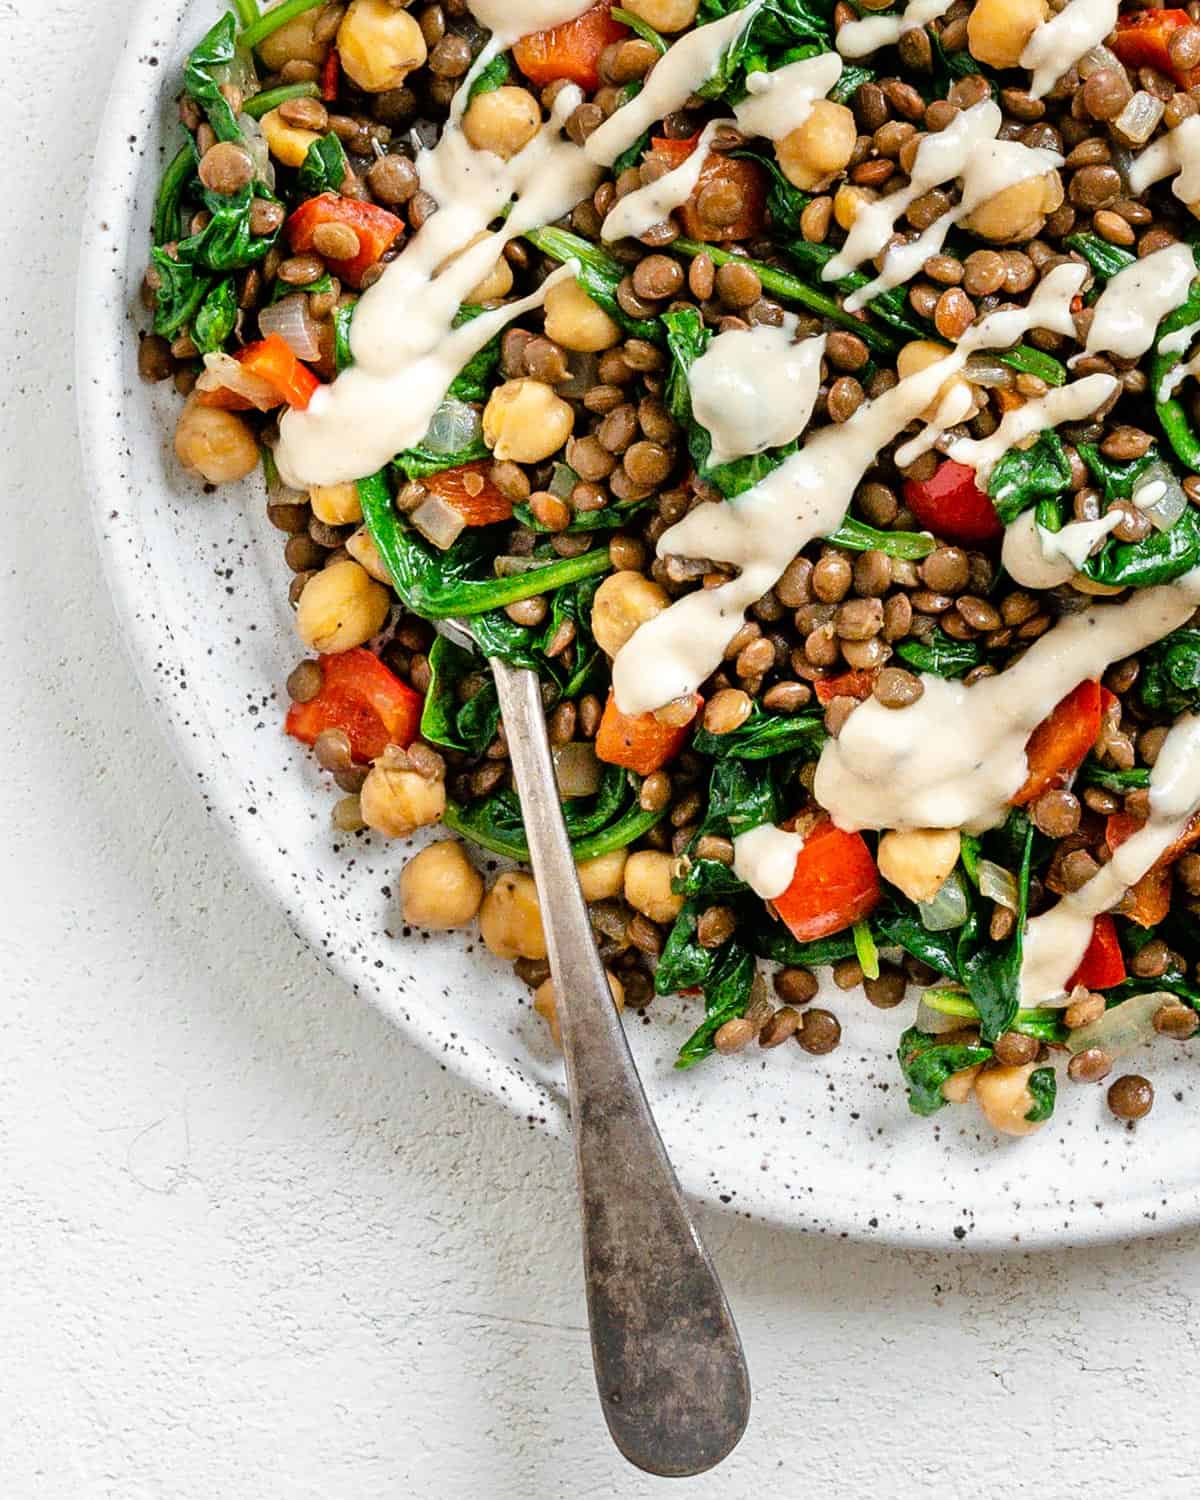 completed Vegan Lentil Chickpea Salad plated on a white plate against a white surface